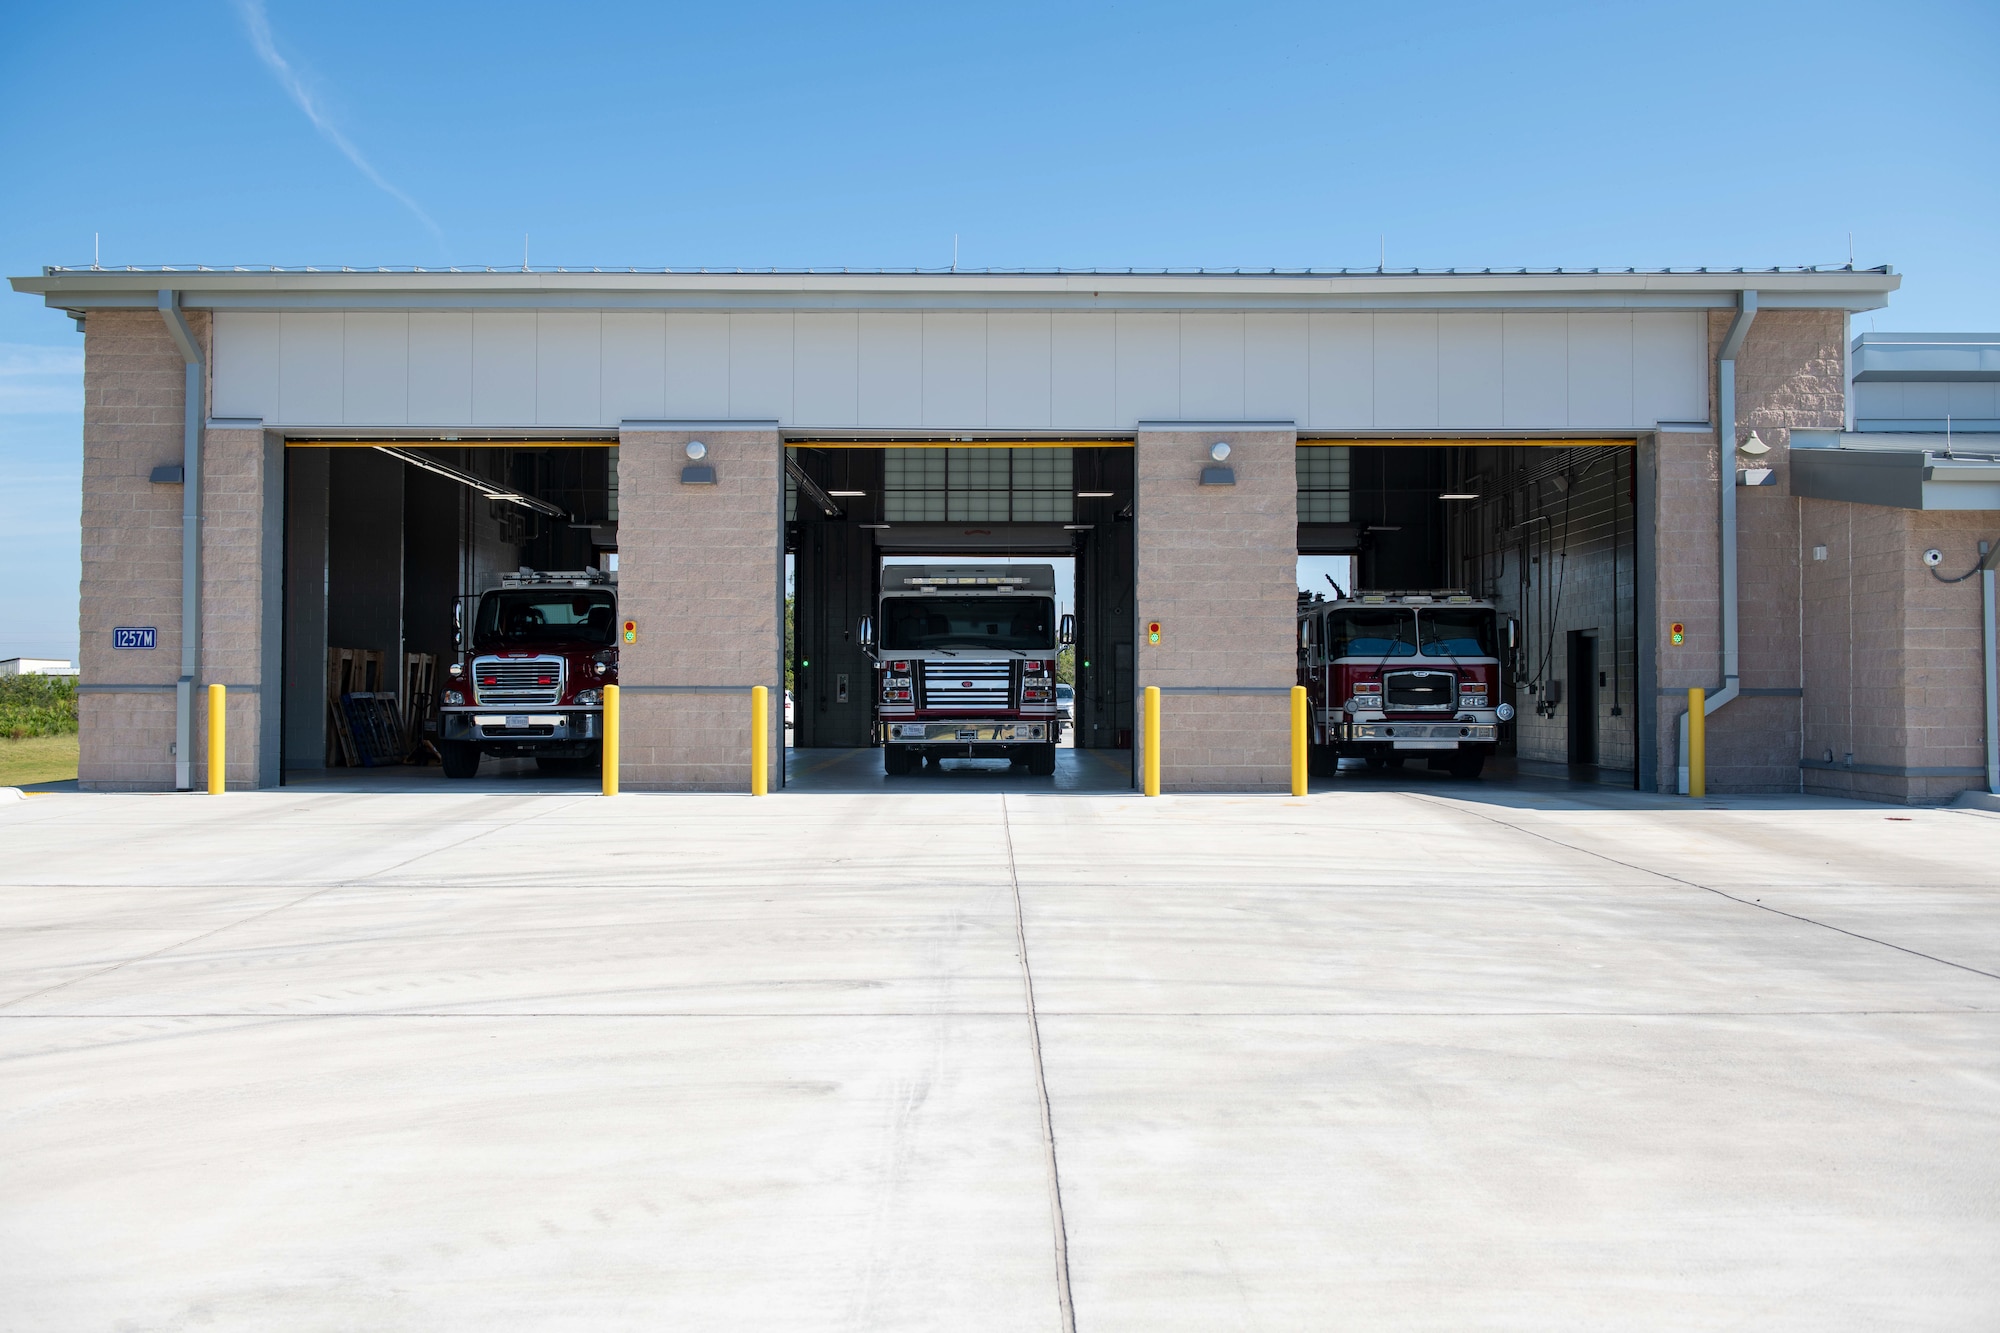 Three rescue trucks parked in the bay of a fire station.